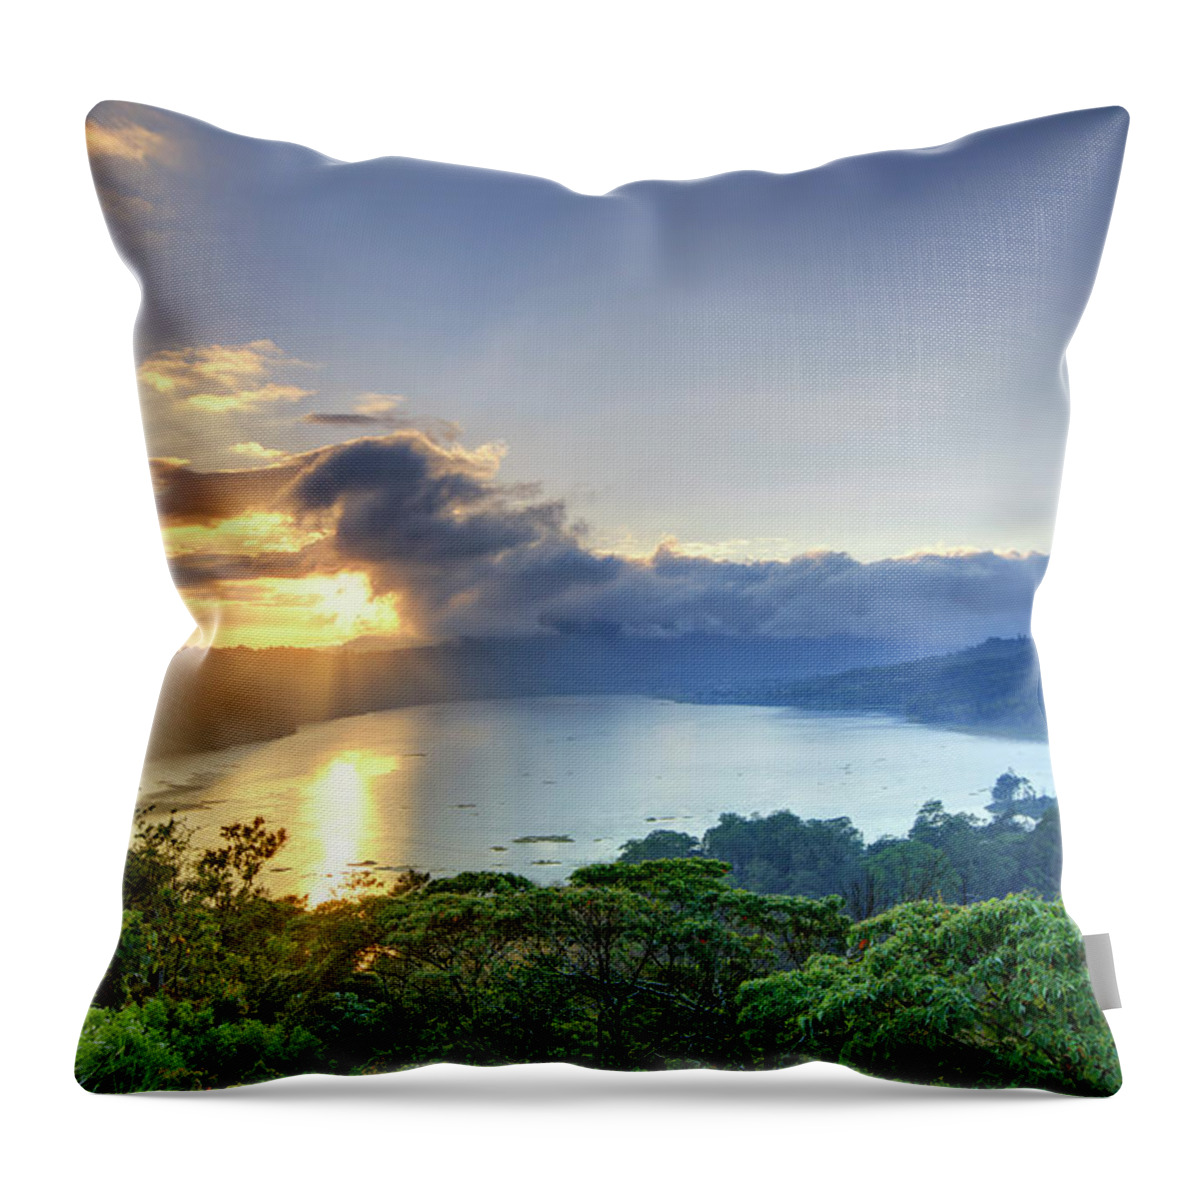 Scenics Throw Pillow featuring the photograph Indonesia, Bali, Mountain And Lakes by Michele Falzone